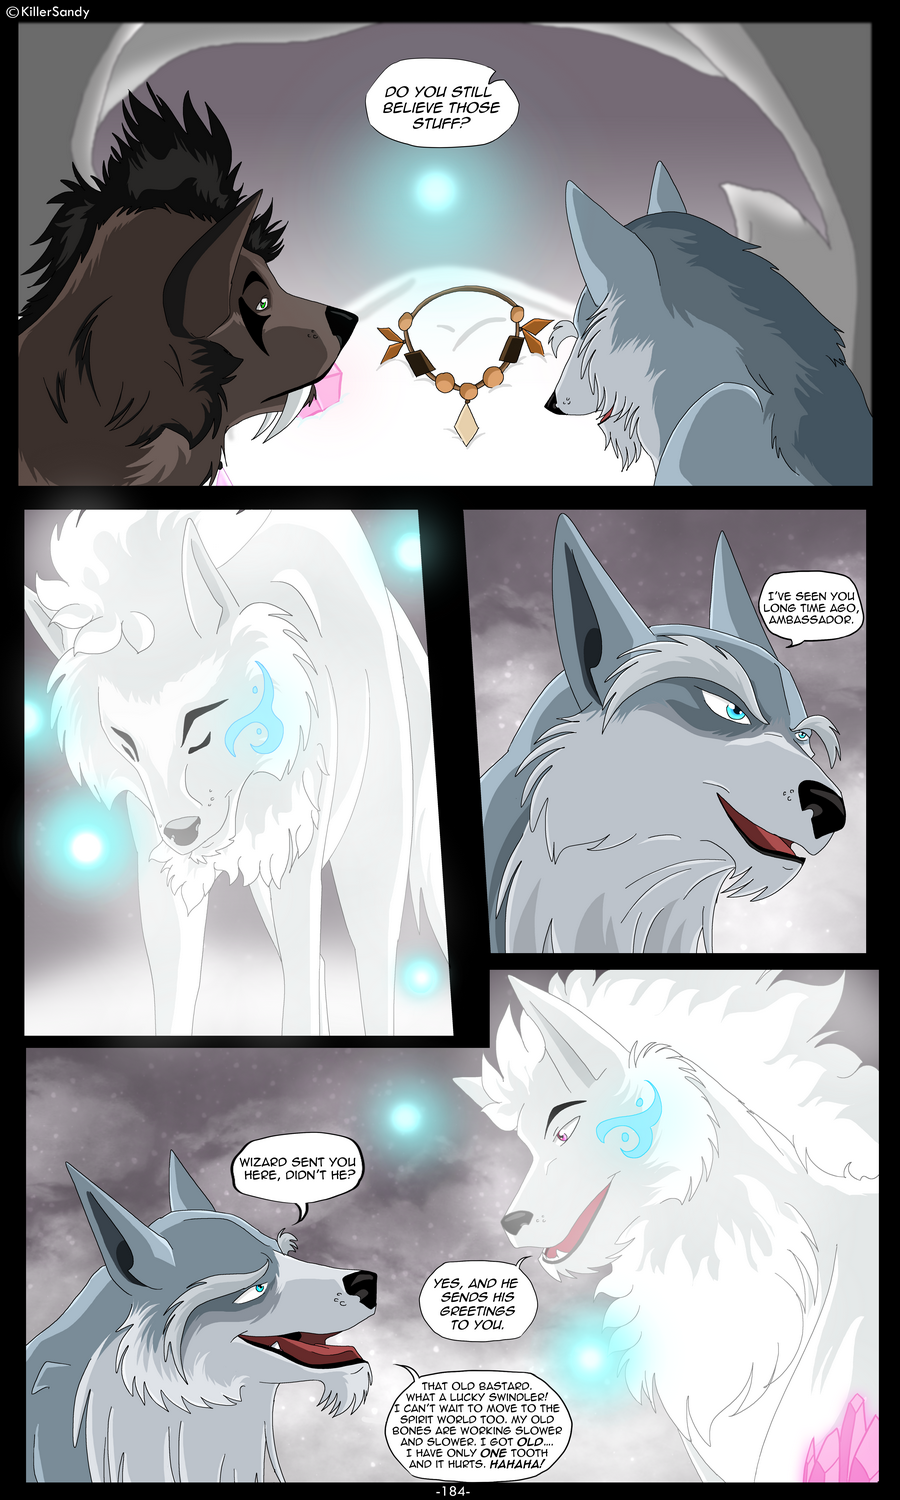 The Prince of the Moonlight Stone page 184